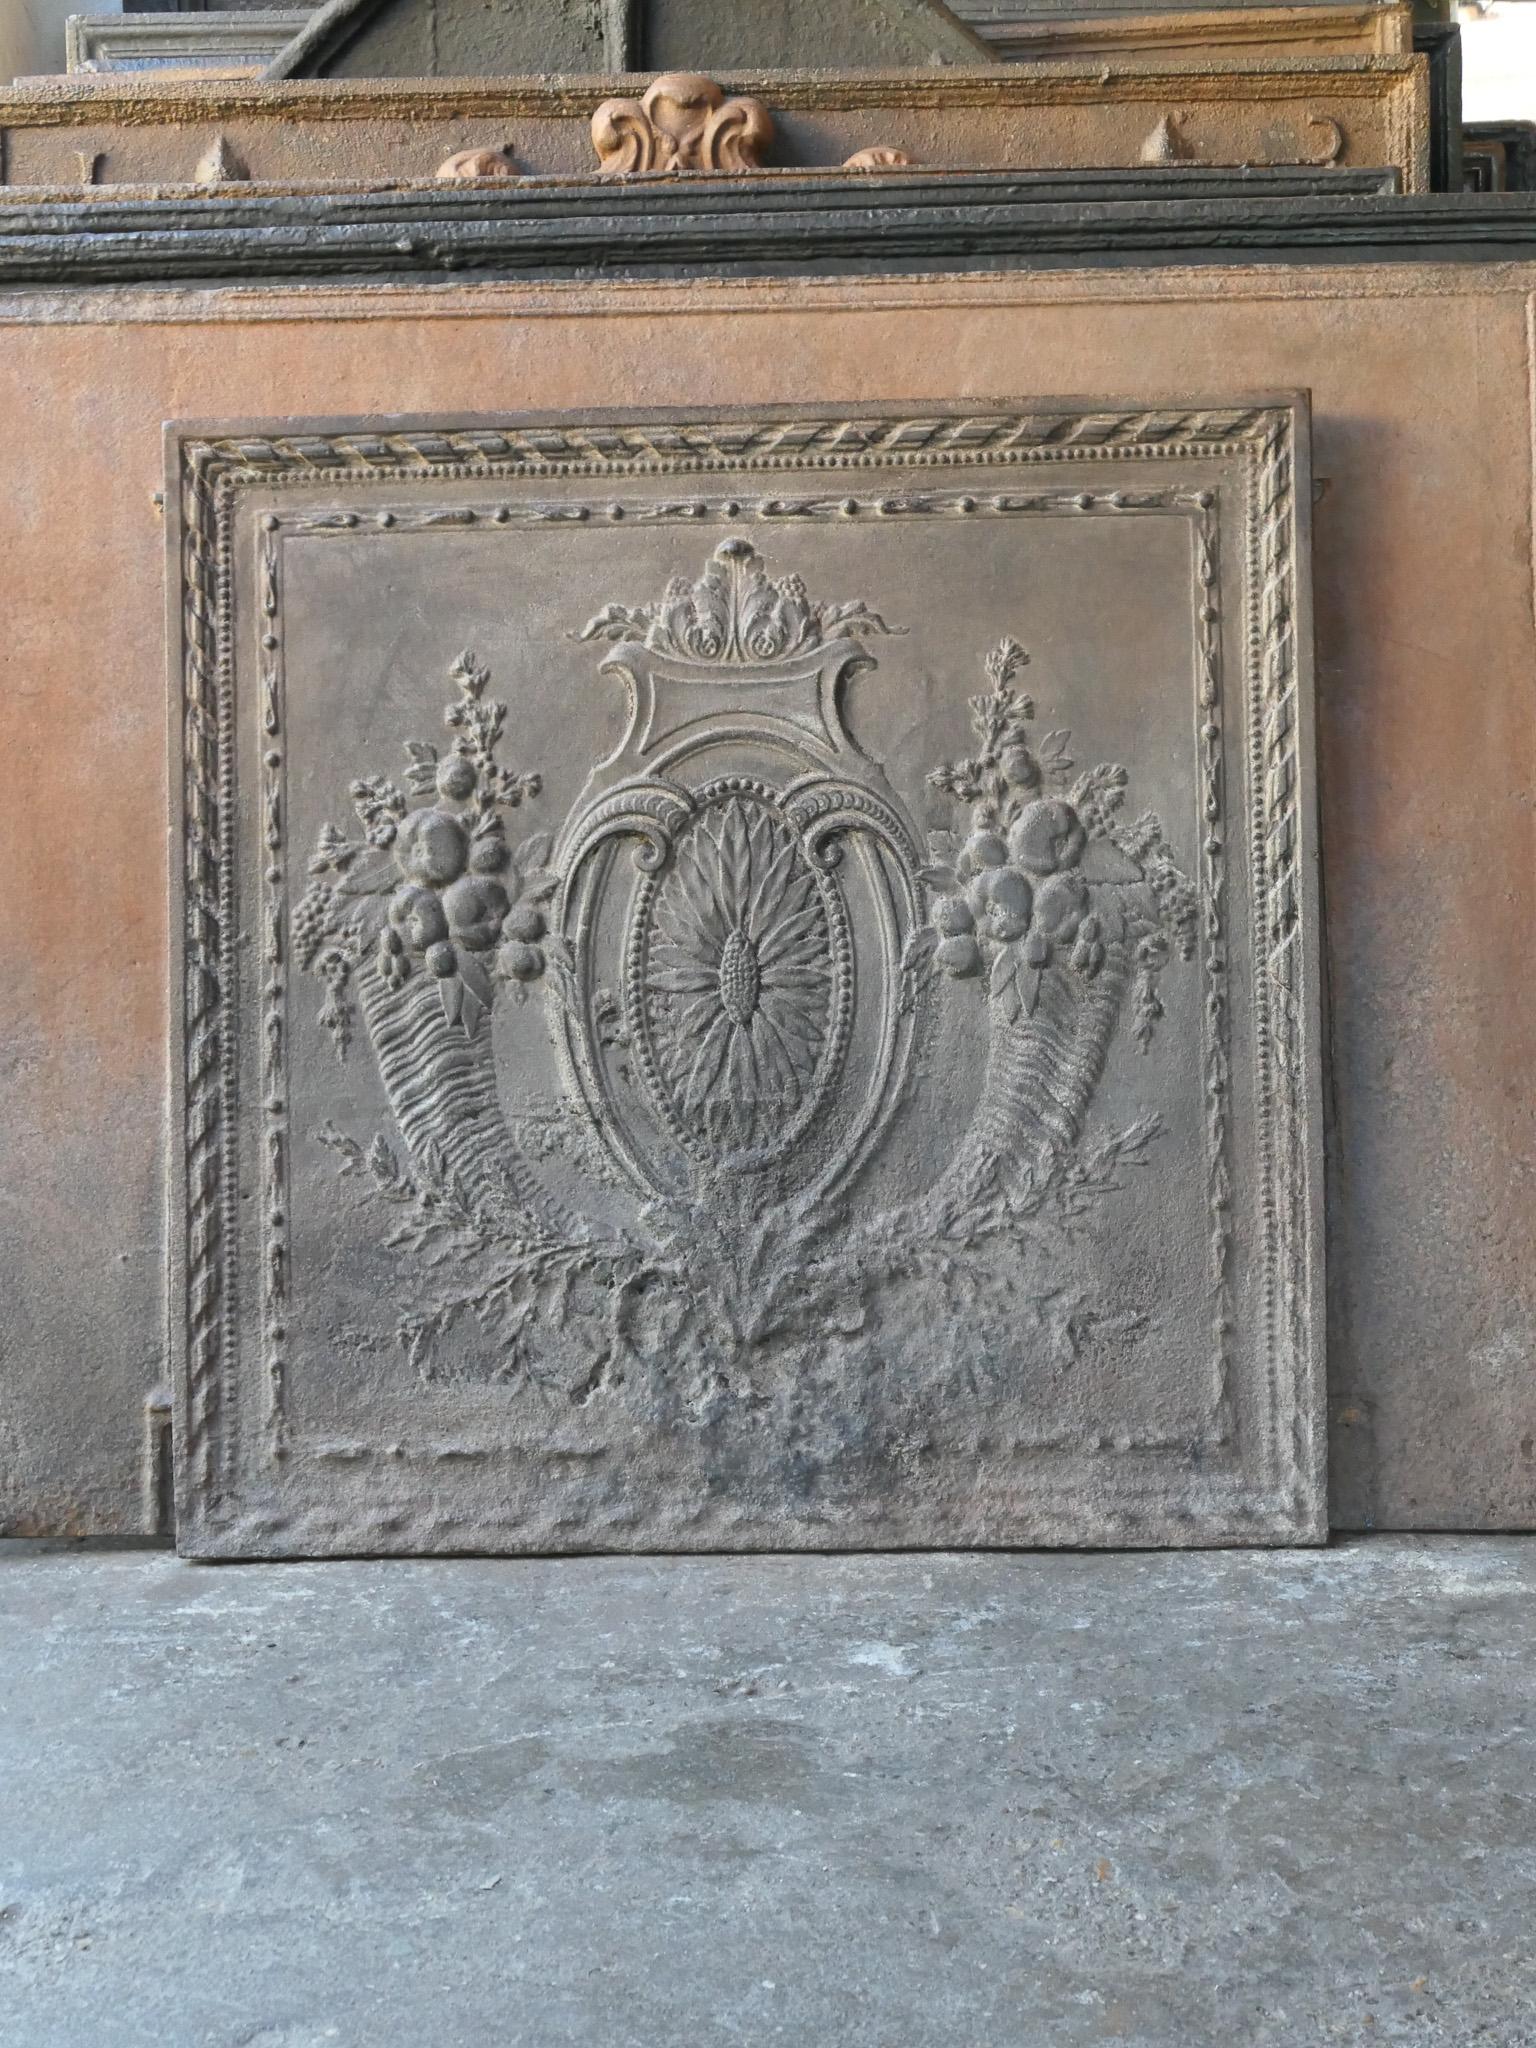 18th century French Louis XV period 'Fruits of the Summer' fireplace fireback. With two horns of plenty, a sunflower and other greenery.

The fireback is made of cast iron. The condition is good, no cracks. The horizontal stripes in the fireback are